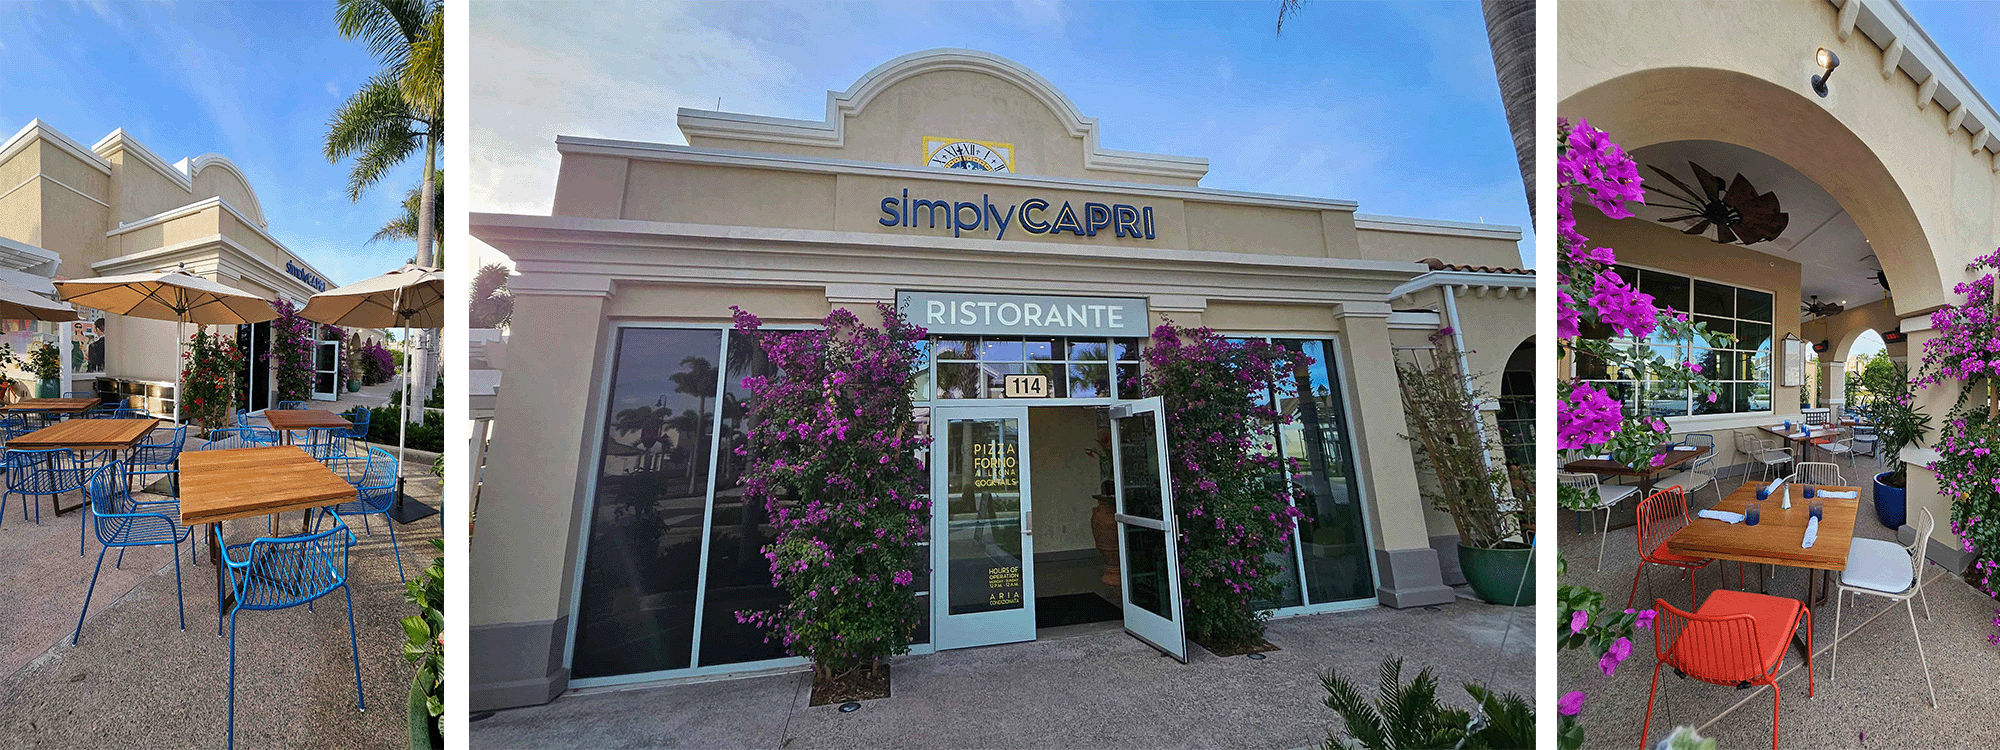 front of simply capri restaurant with images of outdoor seating